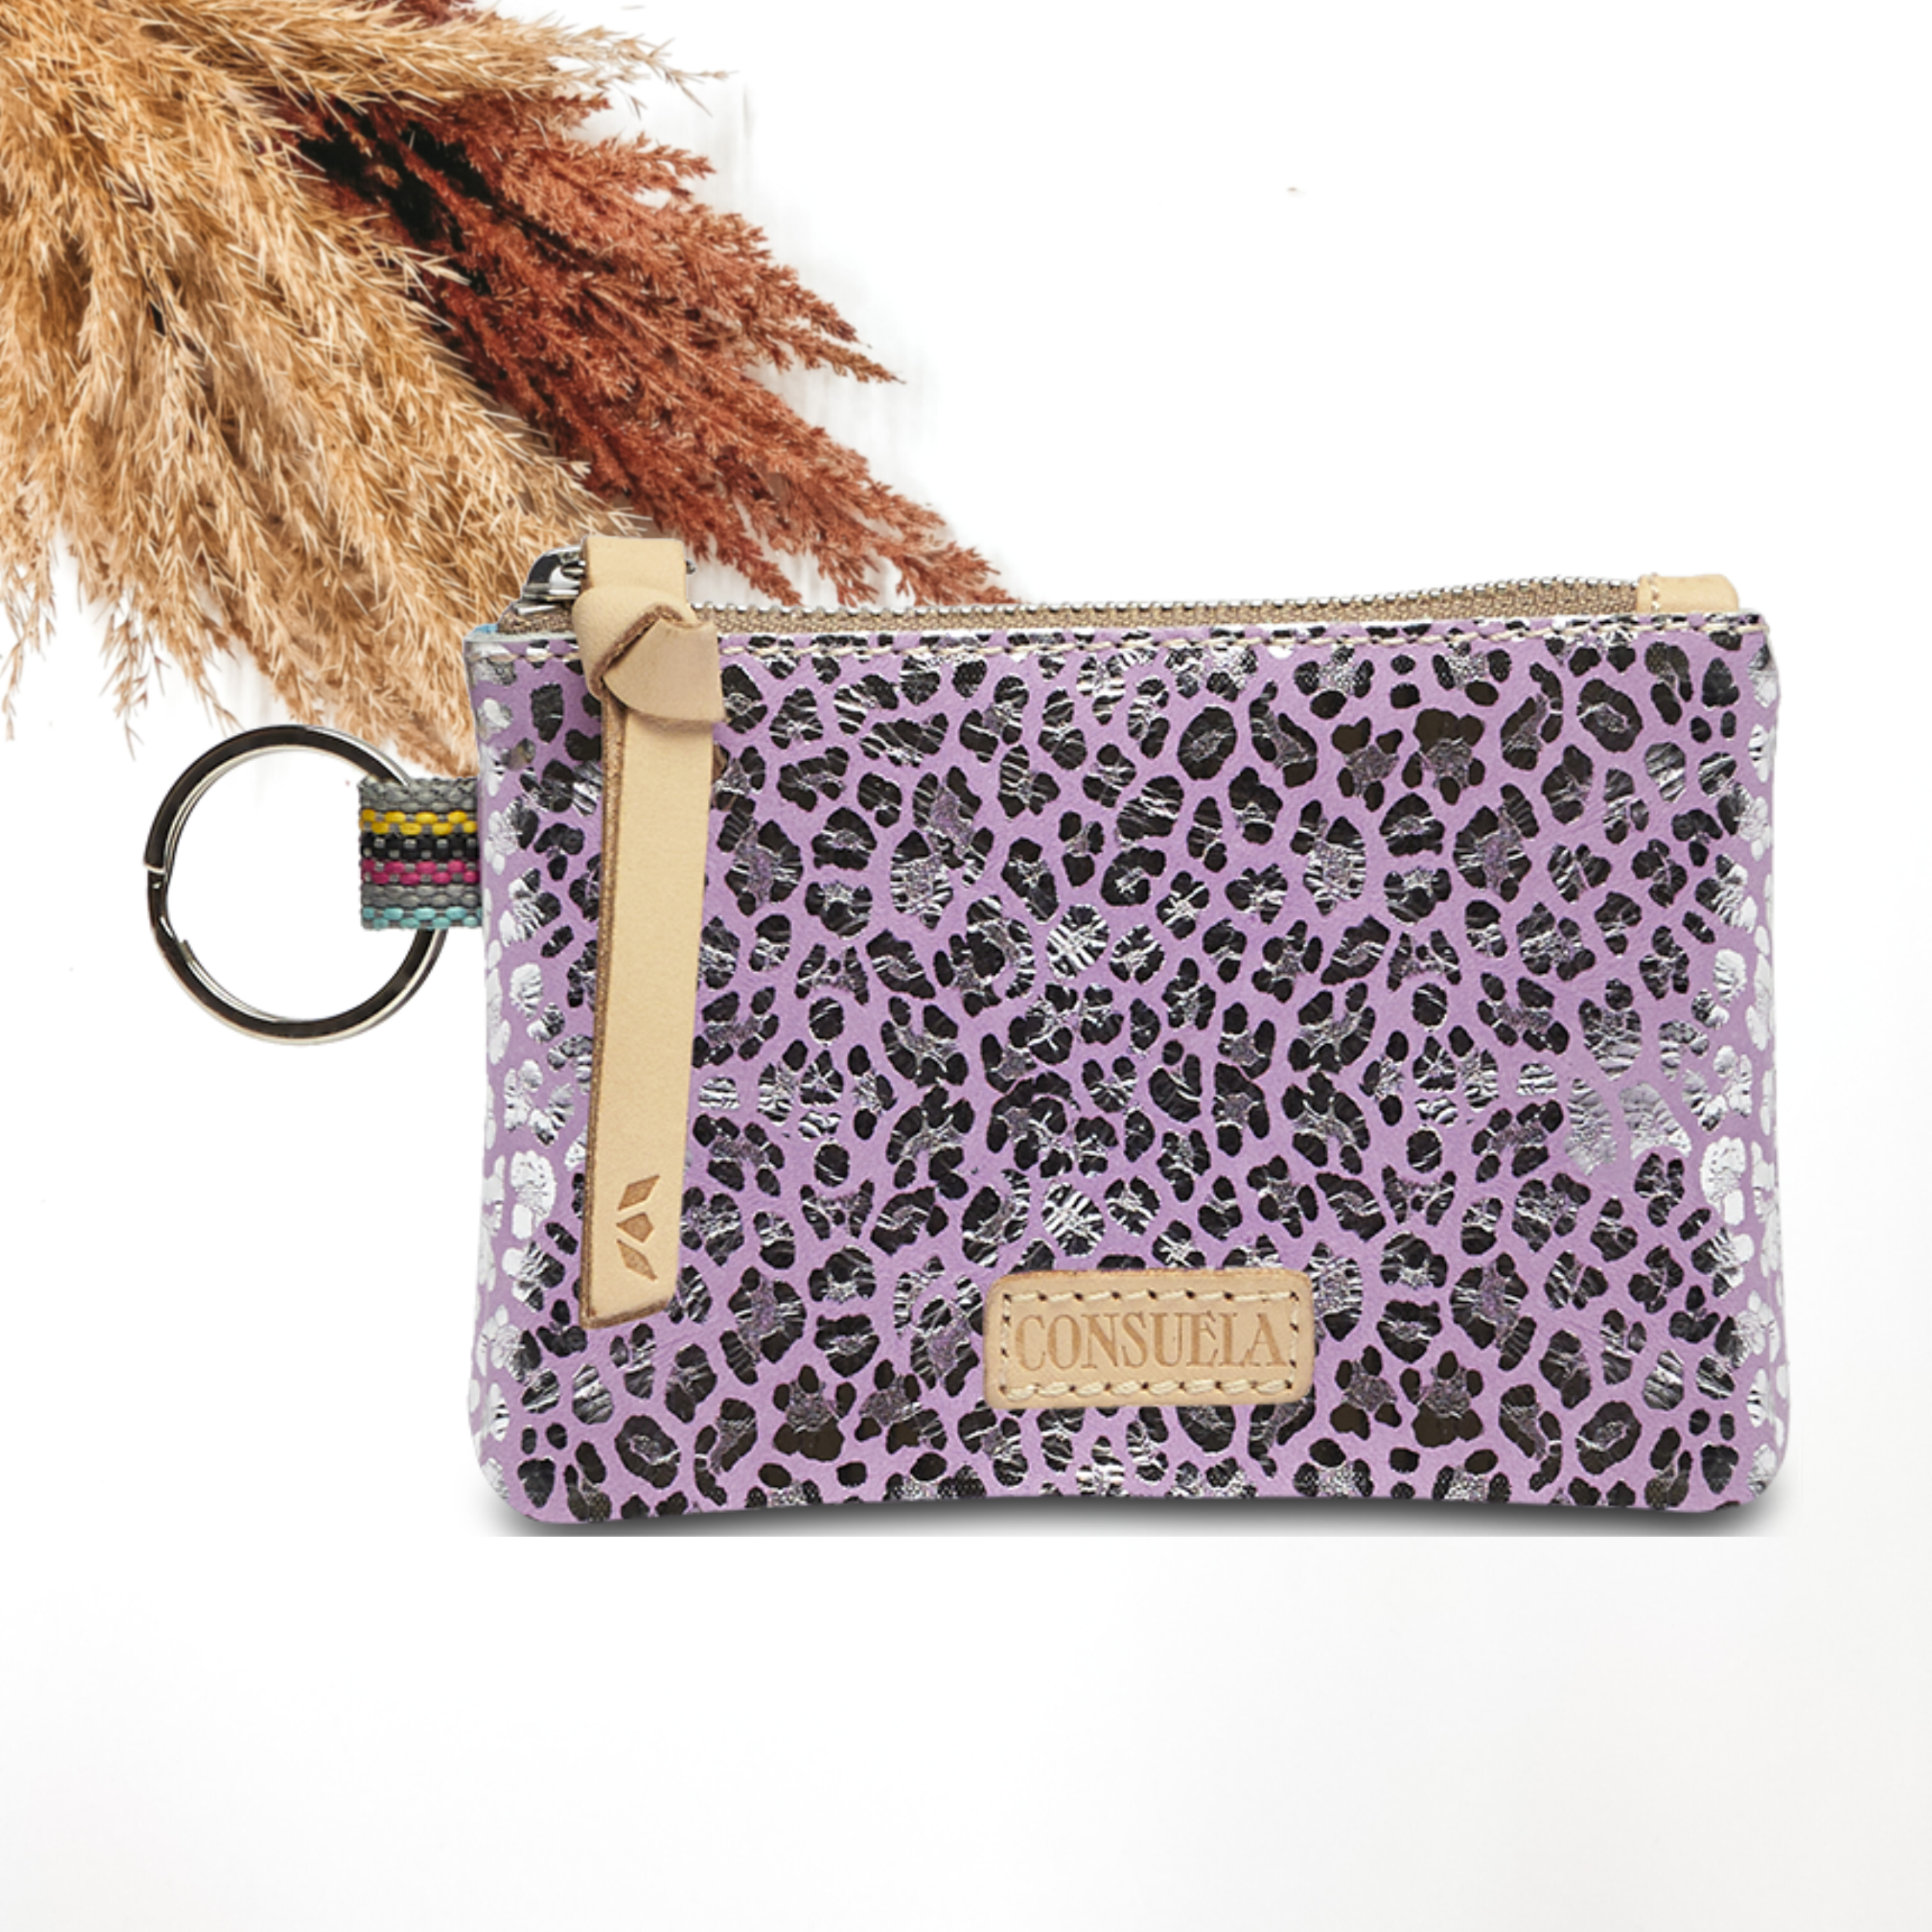 Pictured on a white background is a pouch with a light tan leather zipper pull on the yop and a silver key ring on the side. This pouch has a purple with a metallic silver leopard print design.